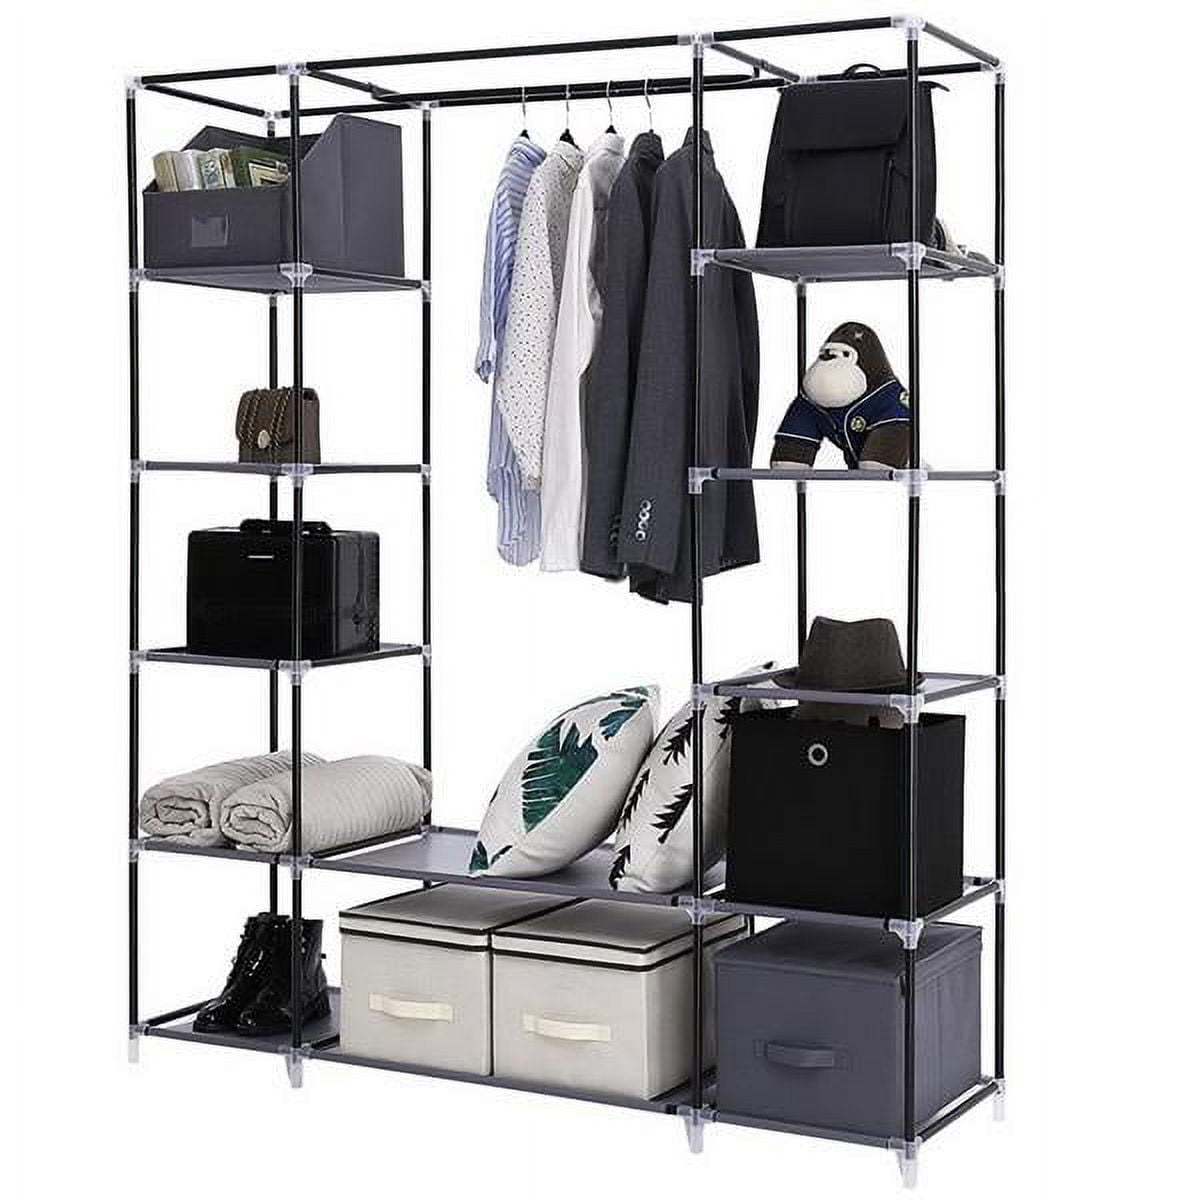 Dropship 69 Portable Clothes Closet Wardrobe Storage Organizer With  Non-Woven Fabric Quick And Easy To Assemble Extra Strong And Durable Dark  Brown to Sell Online at a Lower Price